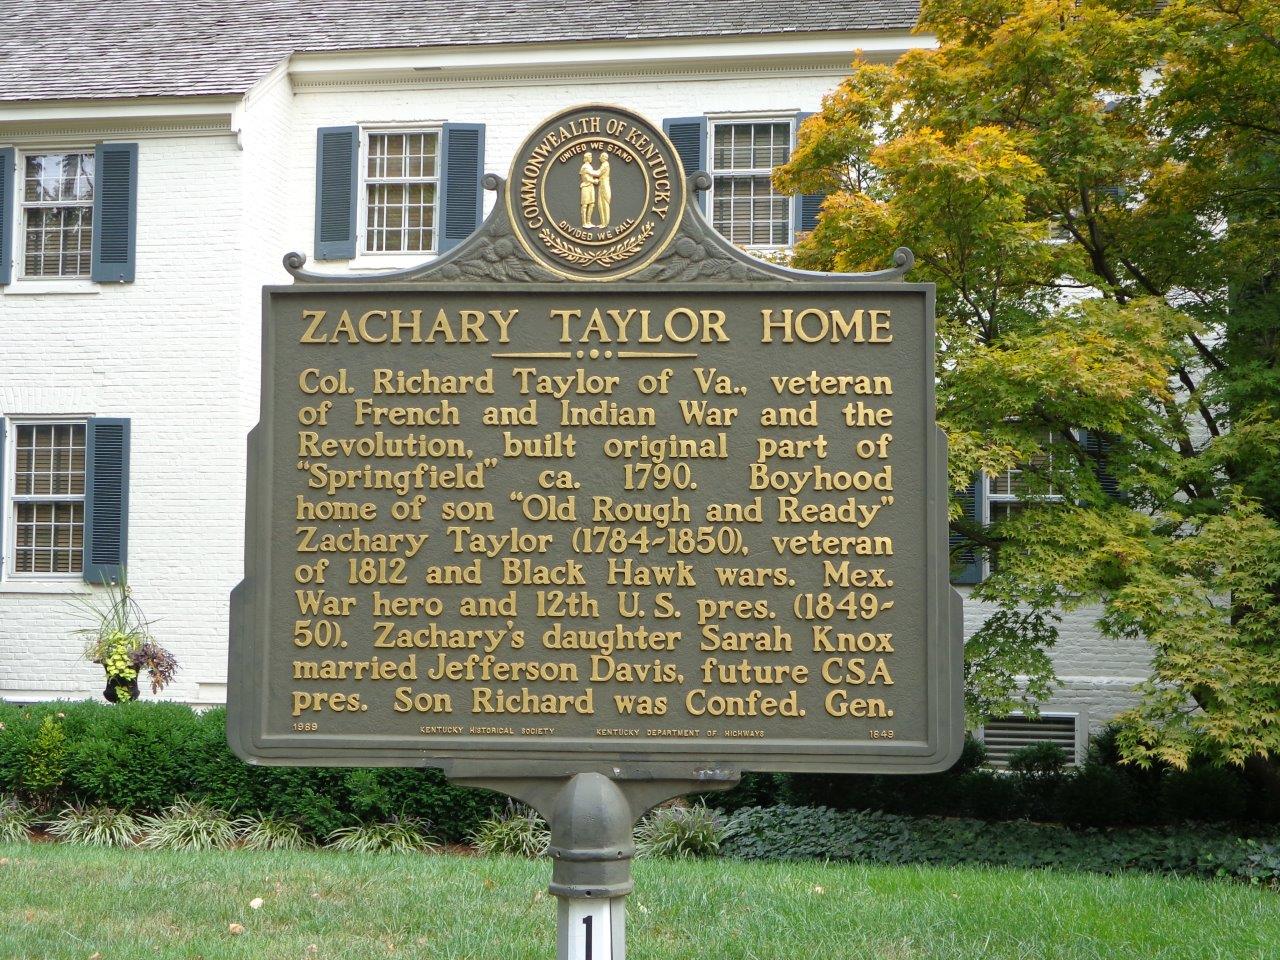 Zachary Taylor home in Louisville, KY